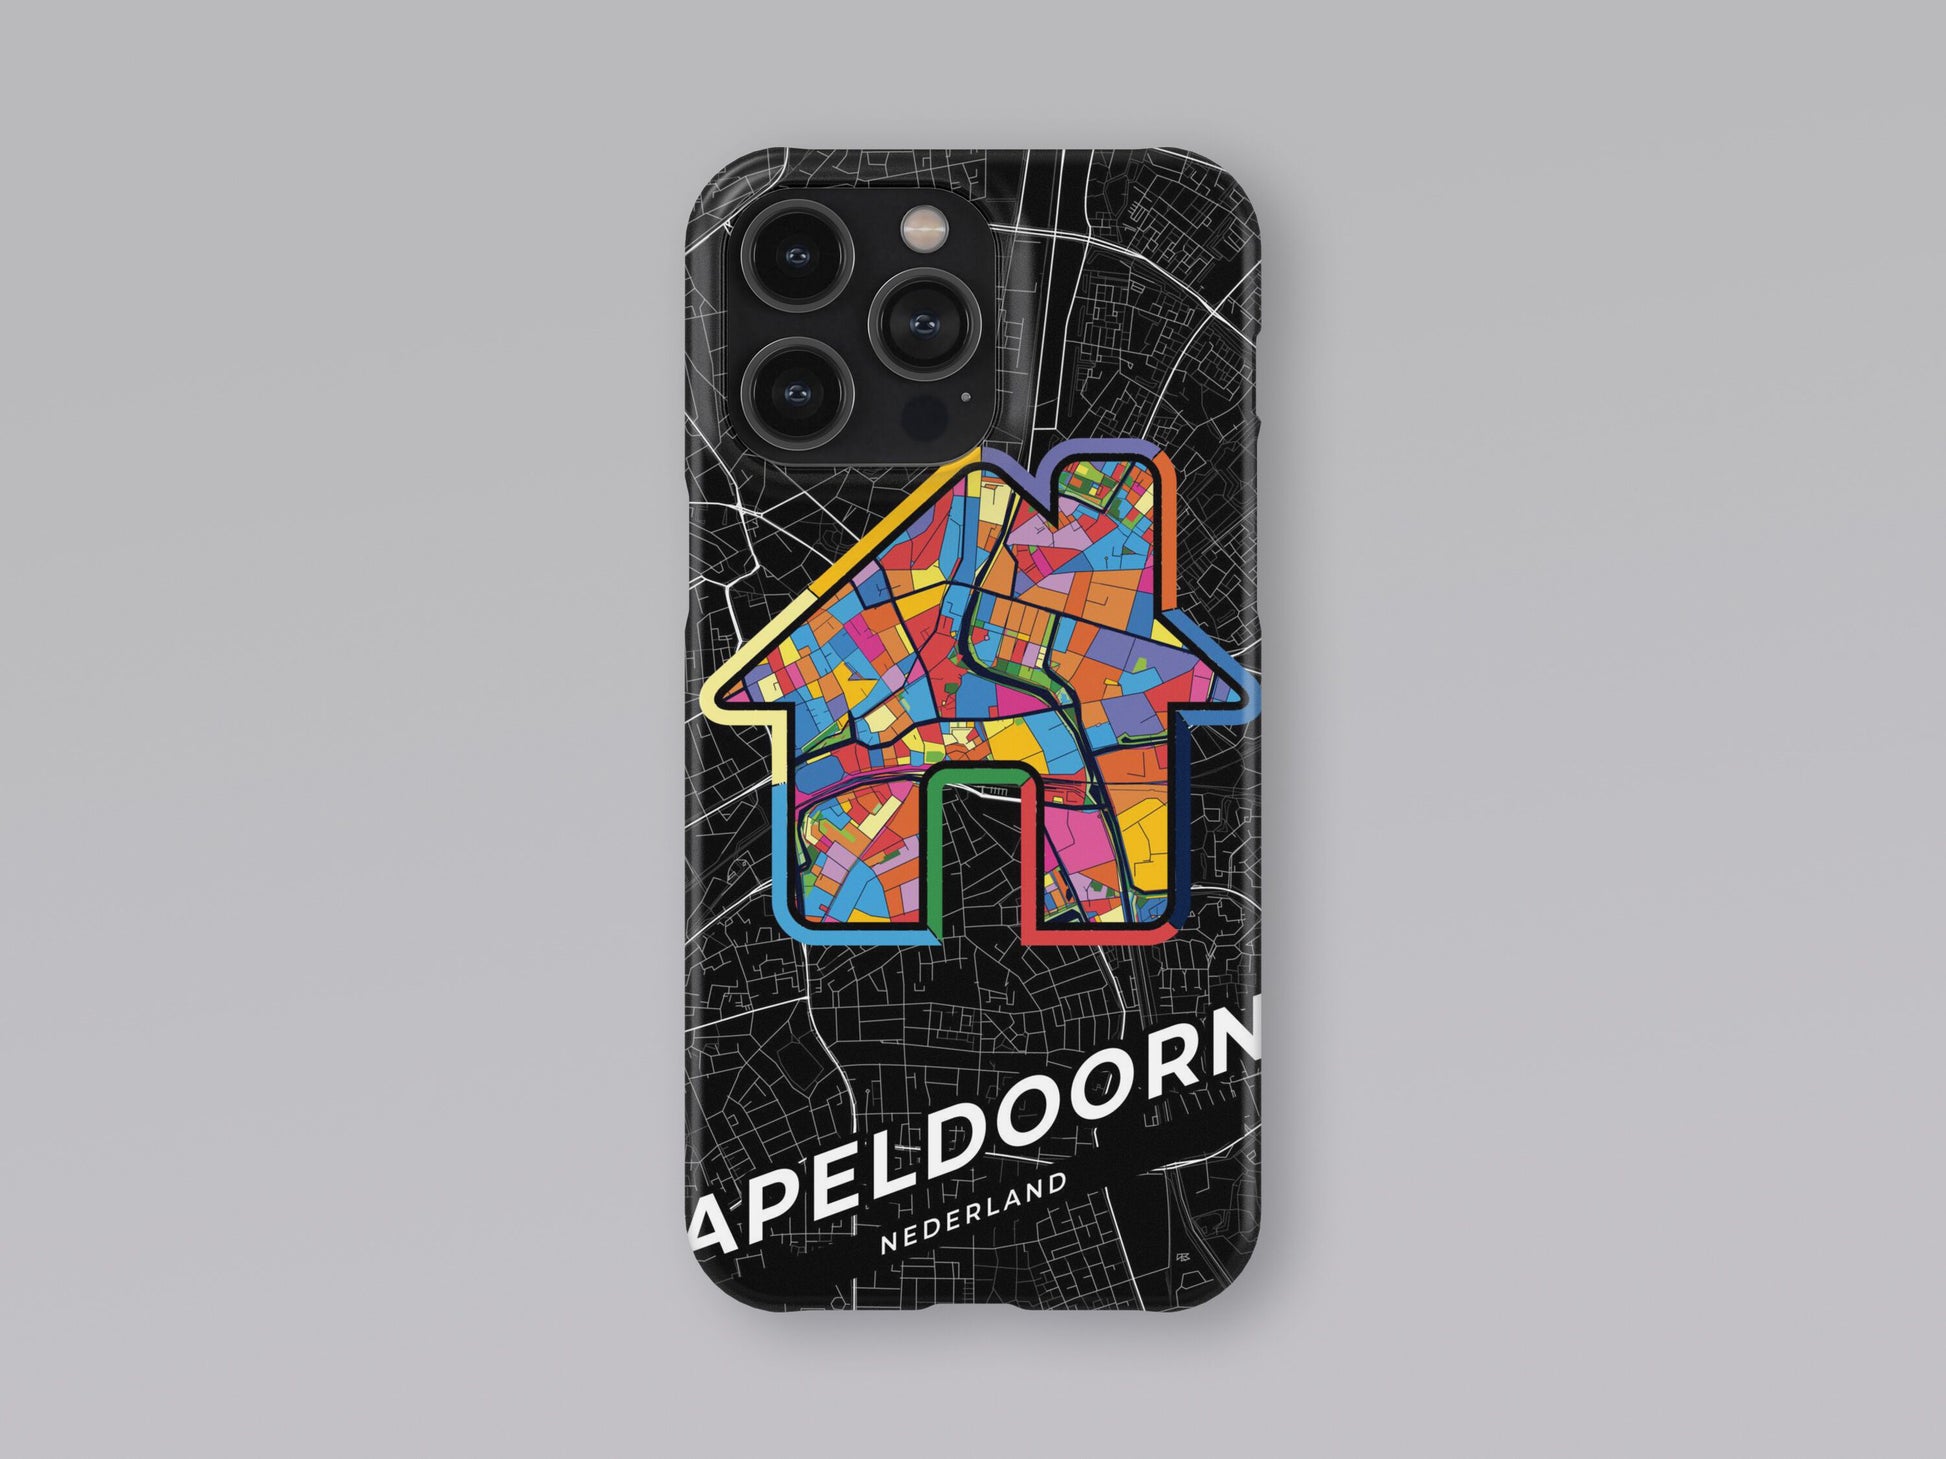 Apeldoorn Netherlands slim phone case with colorful icon. Birthday, wedding or housewarming gift. Couple match cases. 3